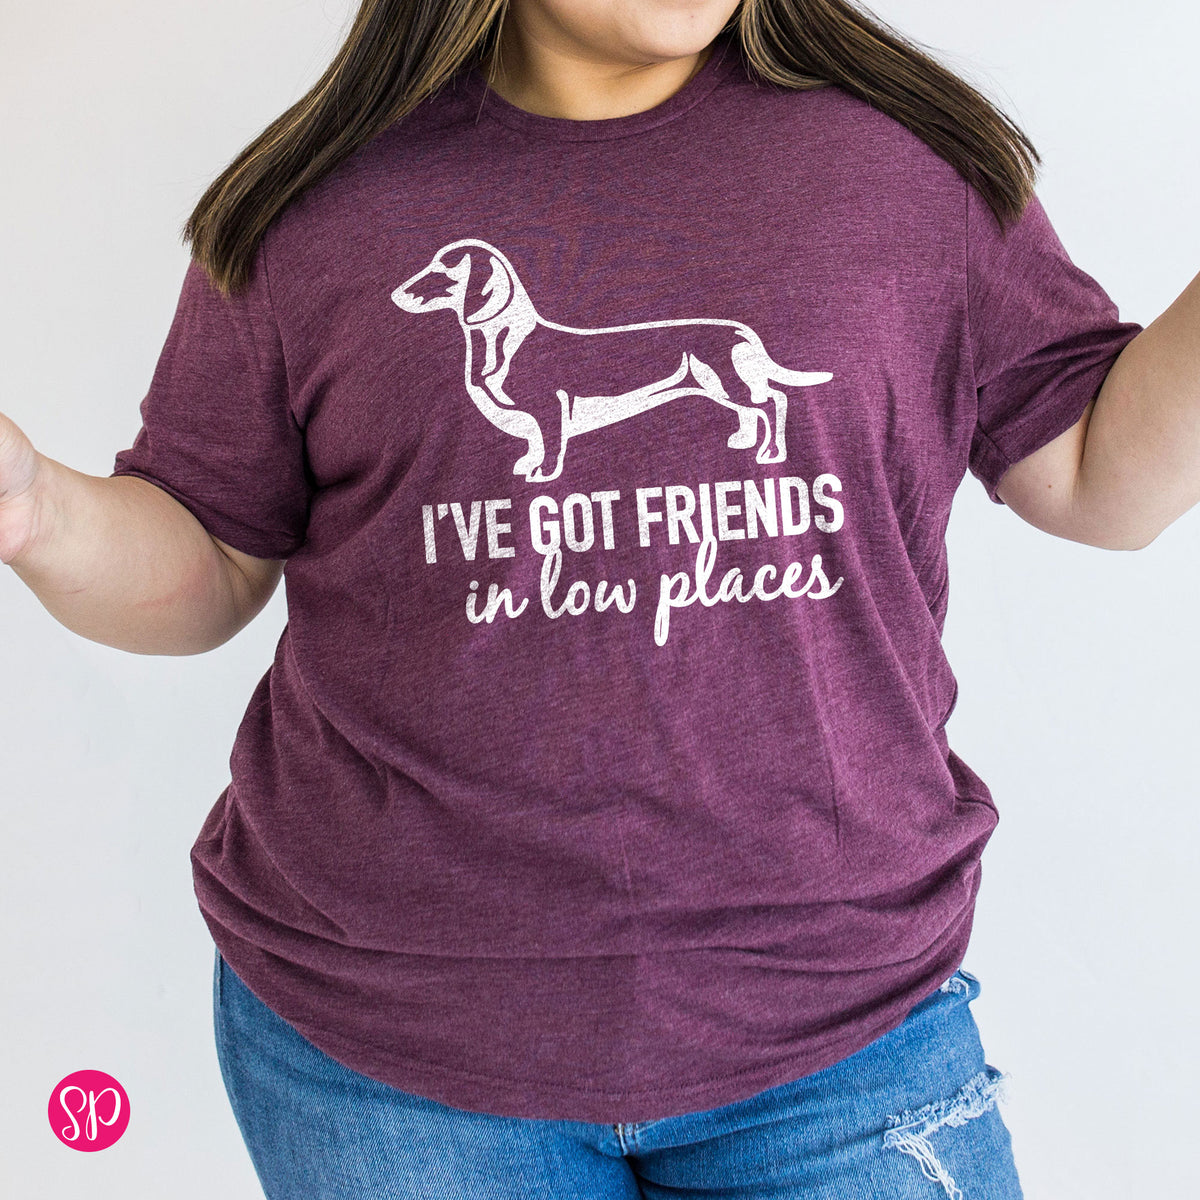 I've Got Friends in Low Places Dachshund Weiner Dog Funny Graphic Tee Shirt